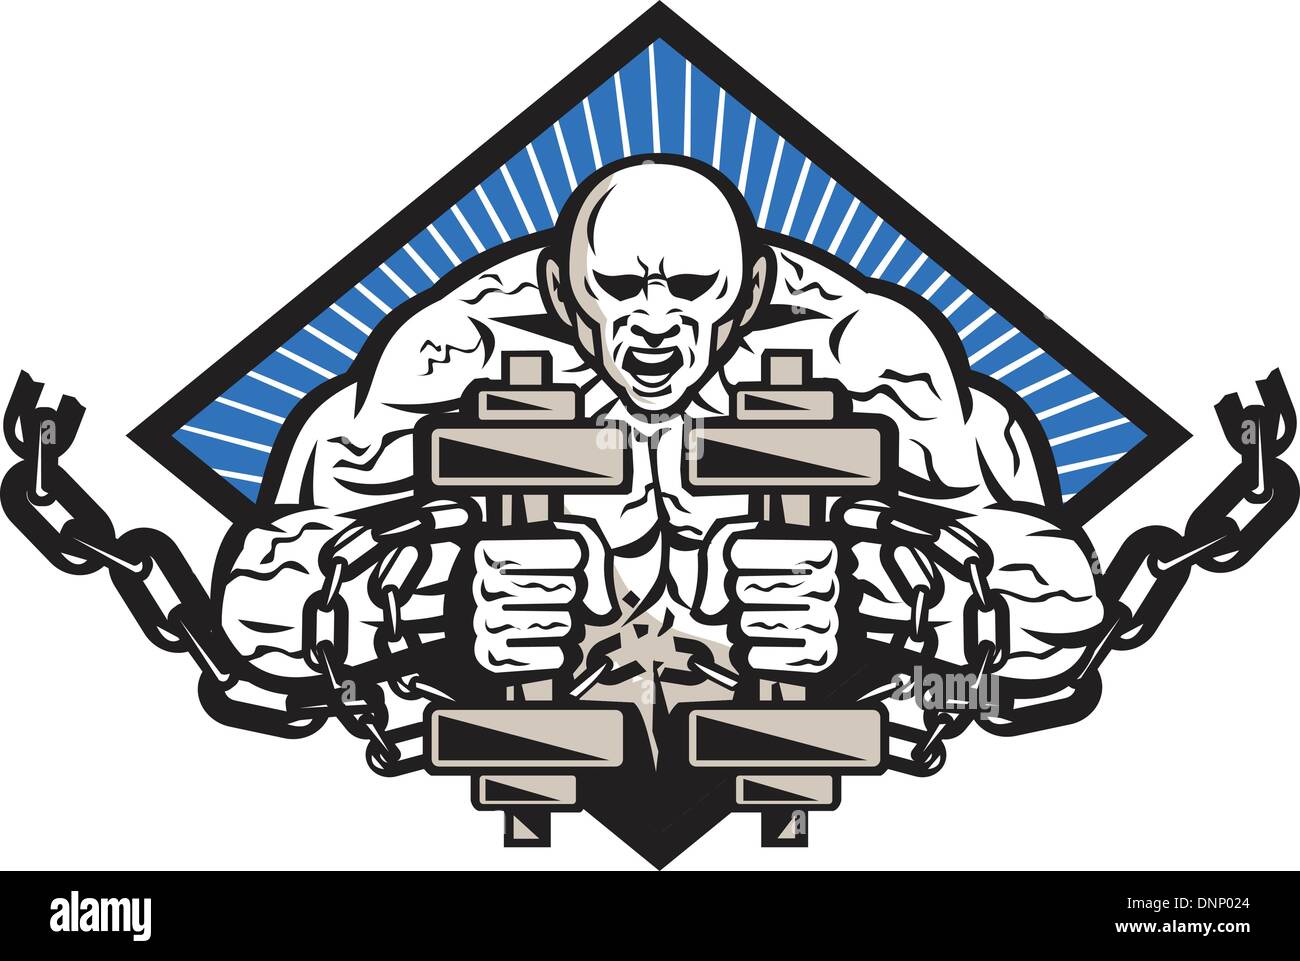 Illustration of a strongman with two dumbbells bound in chains breaking them facing front set inside diamond done in retro style. Stock Vector